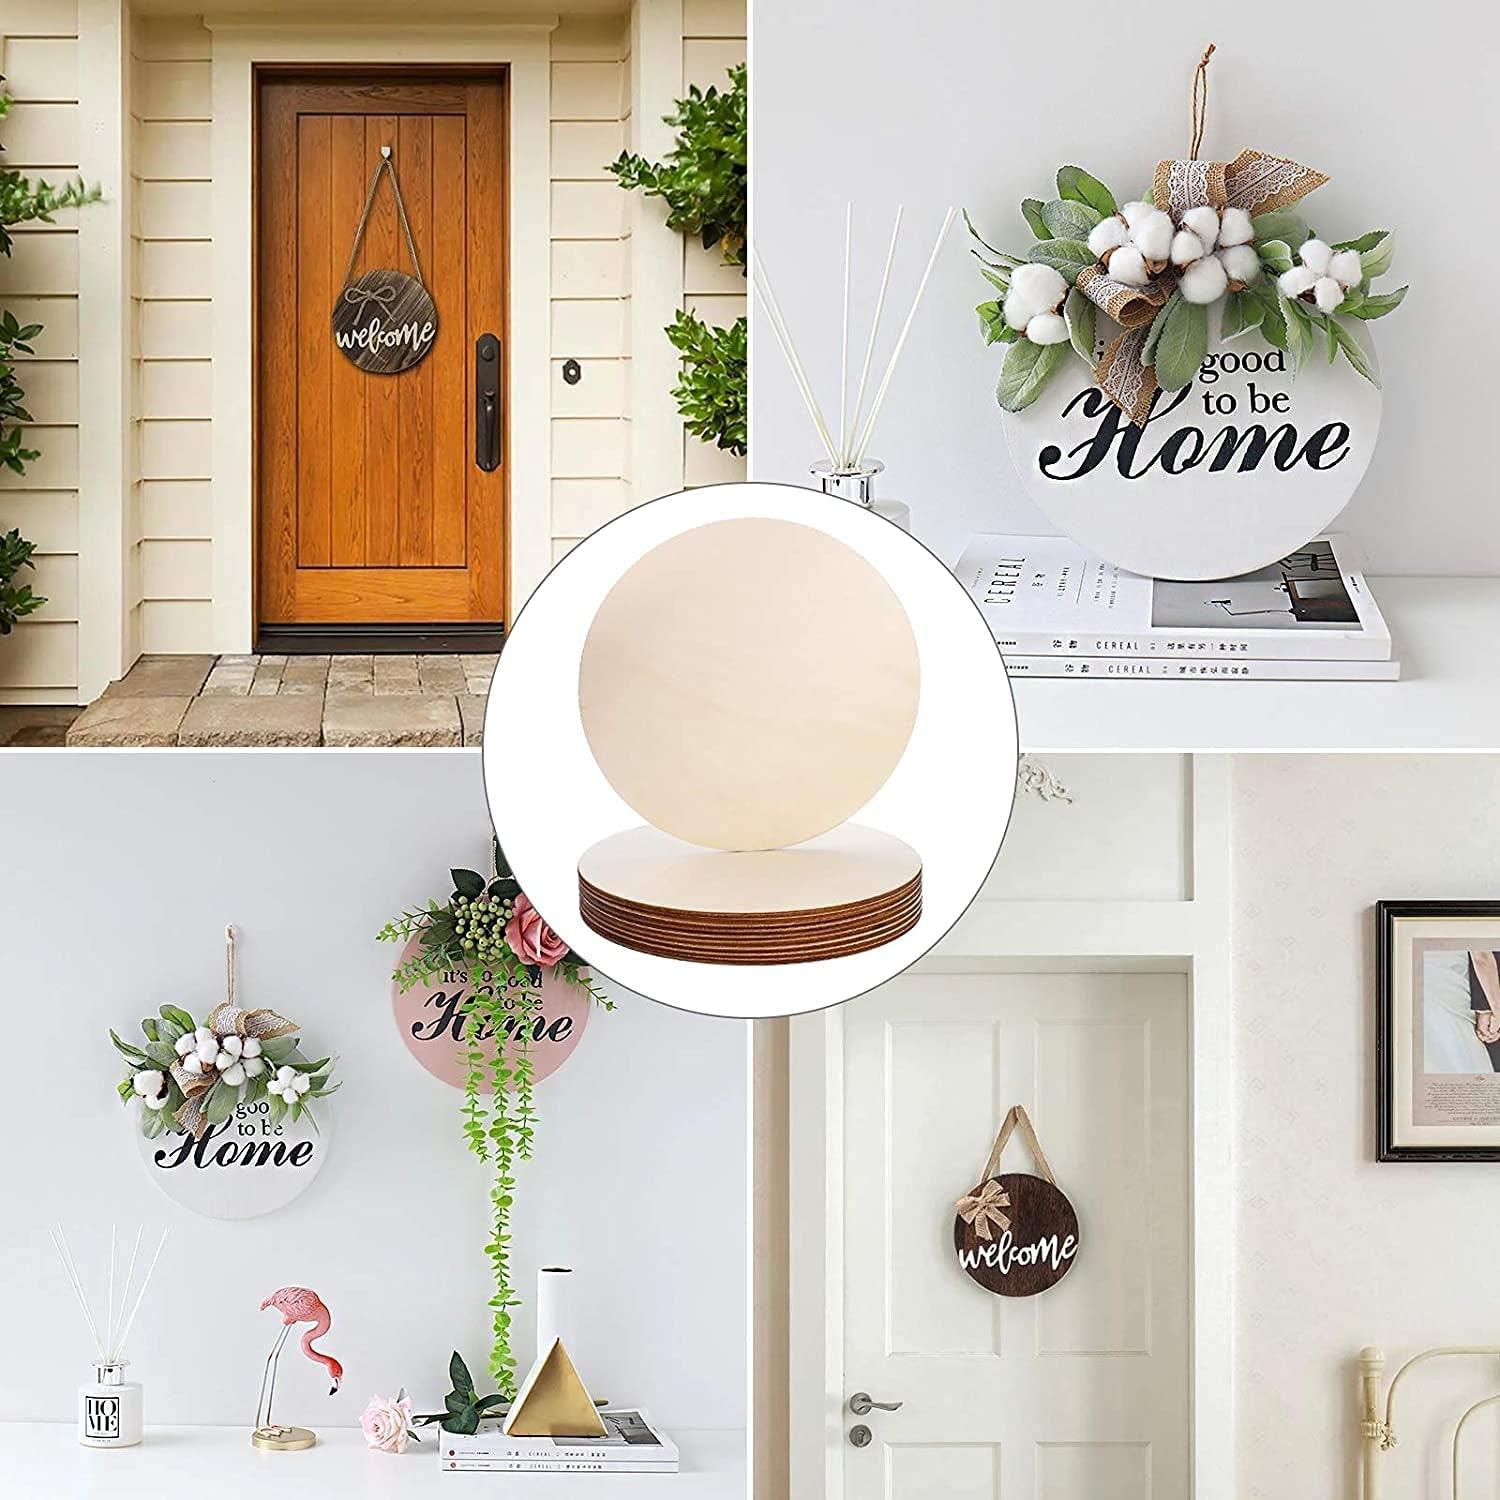  12 Pack 20 Inch Round Wood Circles for Crafts Unfinished Wood  Circles Natural Round Wood Discs Blank Round Wood Signs Cutouts for Door  Hangers, Door Design, Signs Making, Wood Burning, Painting